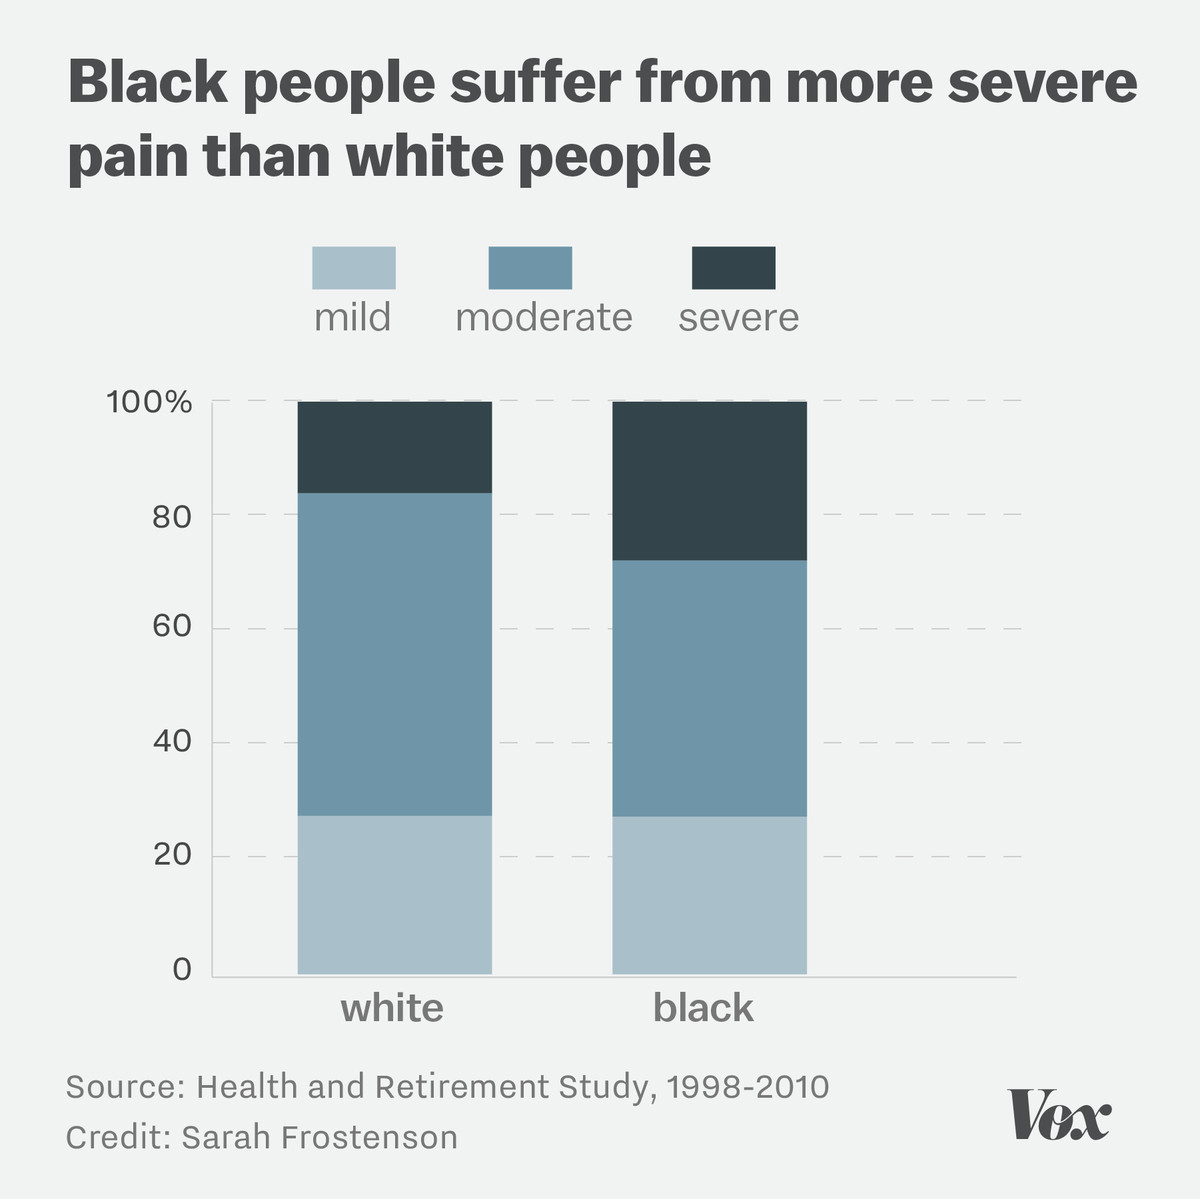 Chart showing that black people experience more severe pain than white people